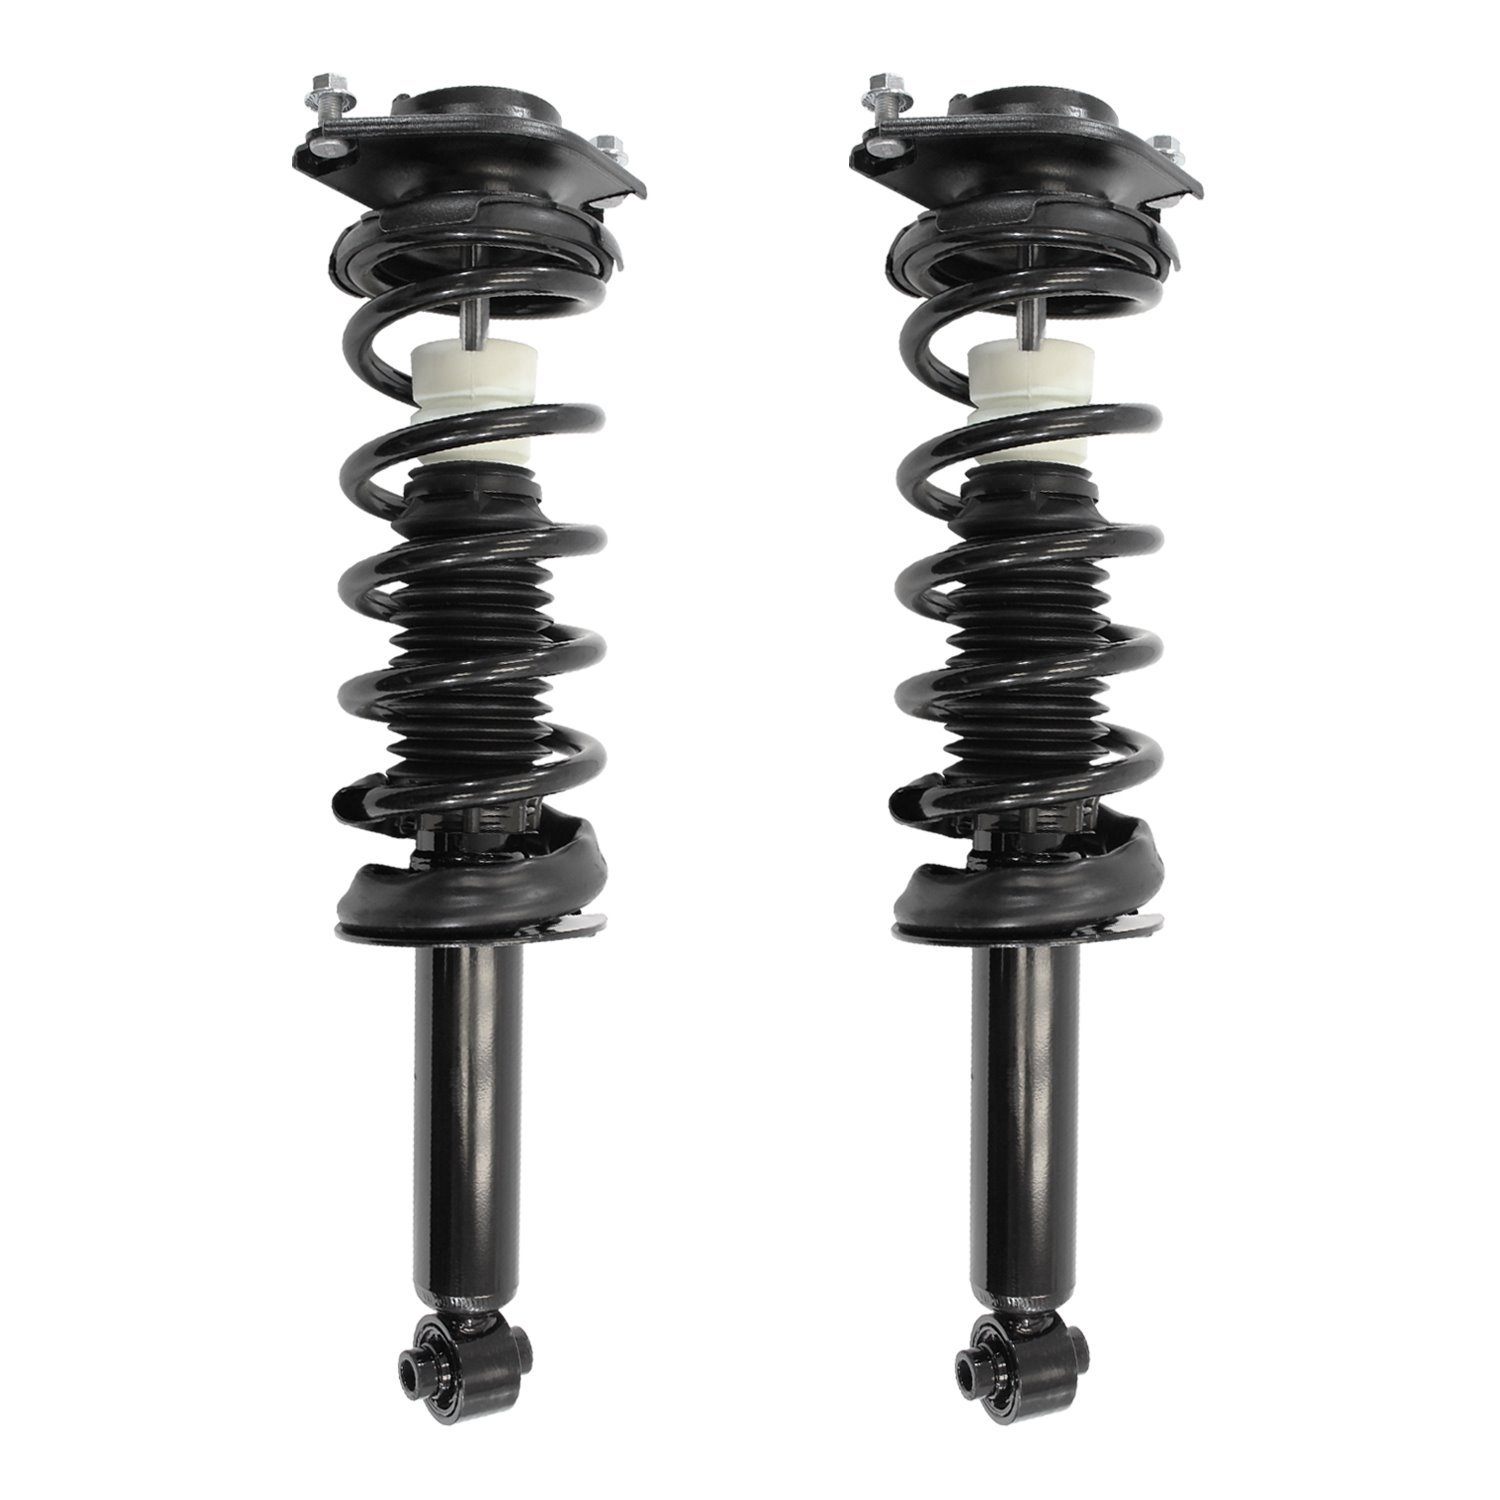 2-16110-001 Rear Suspension Strut & Coil Spring Assemby Set Fits Select Subaru Outback